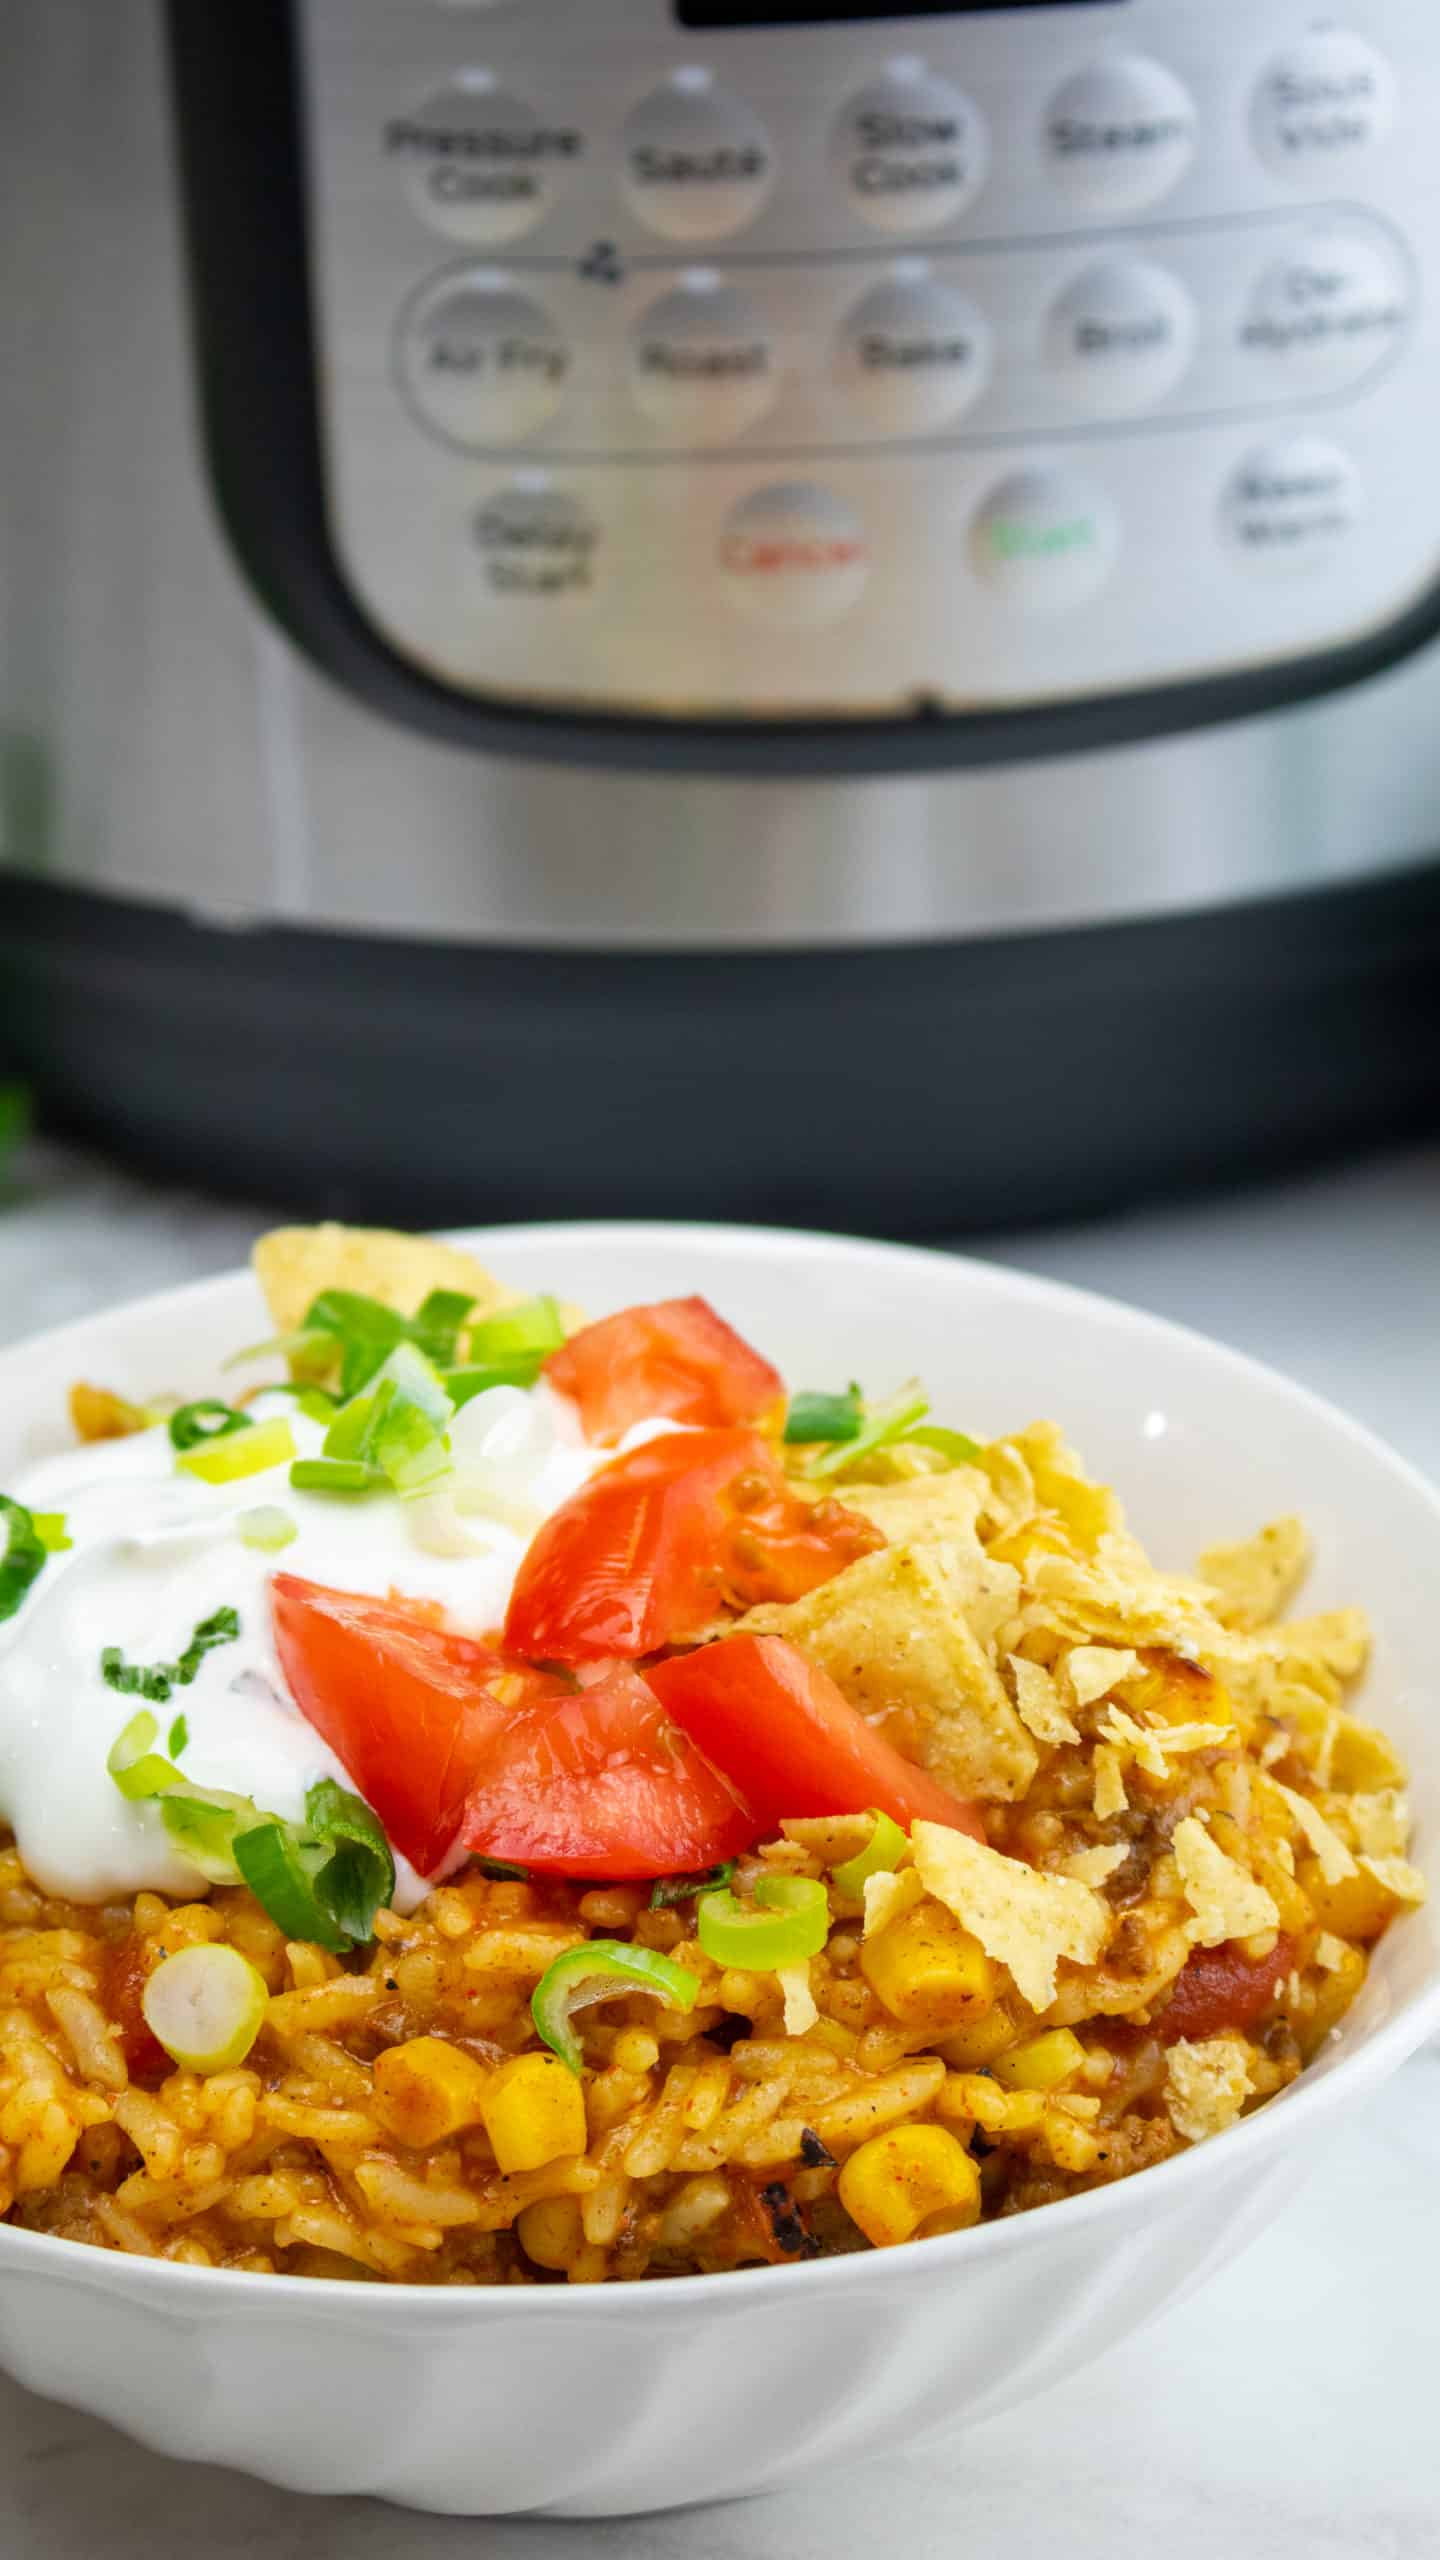 Instant Pot Beef Enchilada Casserole Hamburger Helper Recipe is an easy recipe using mostly pantry ingredients and easy to stretch.